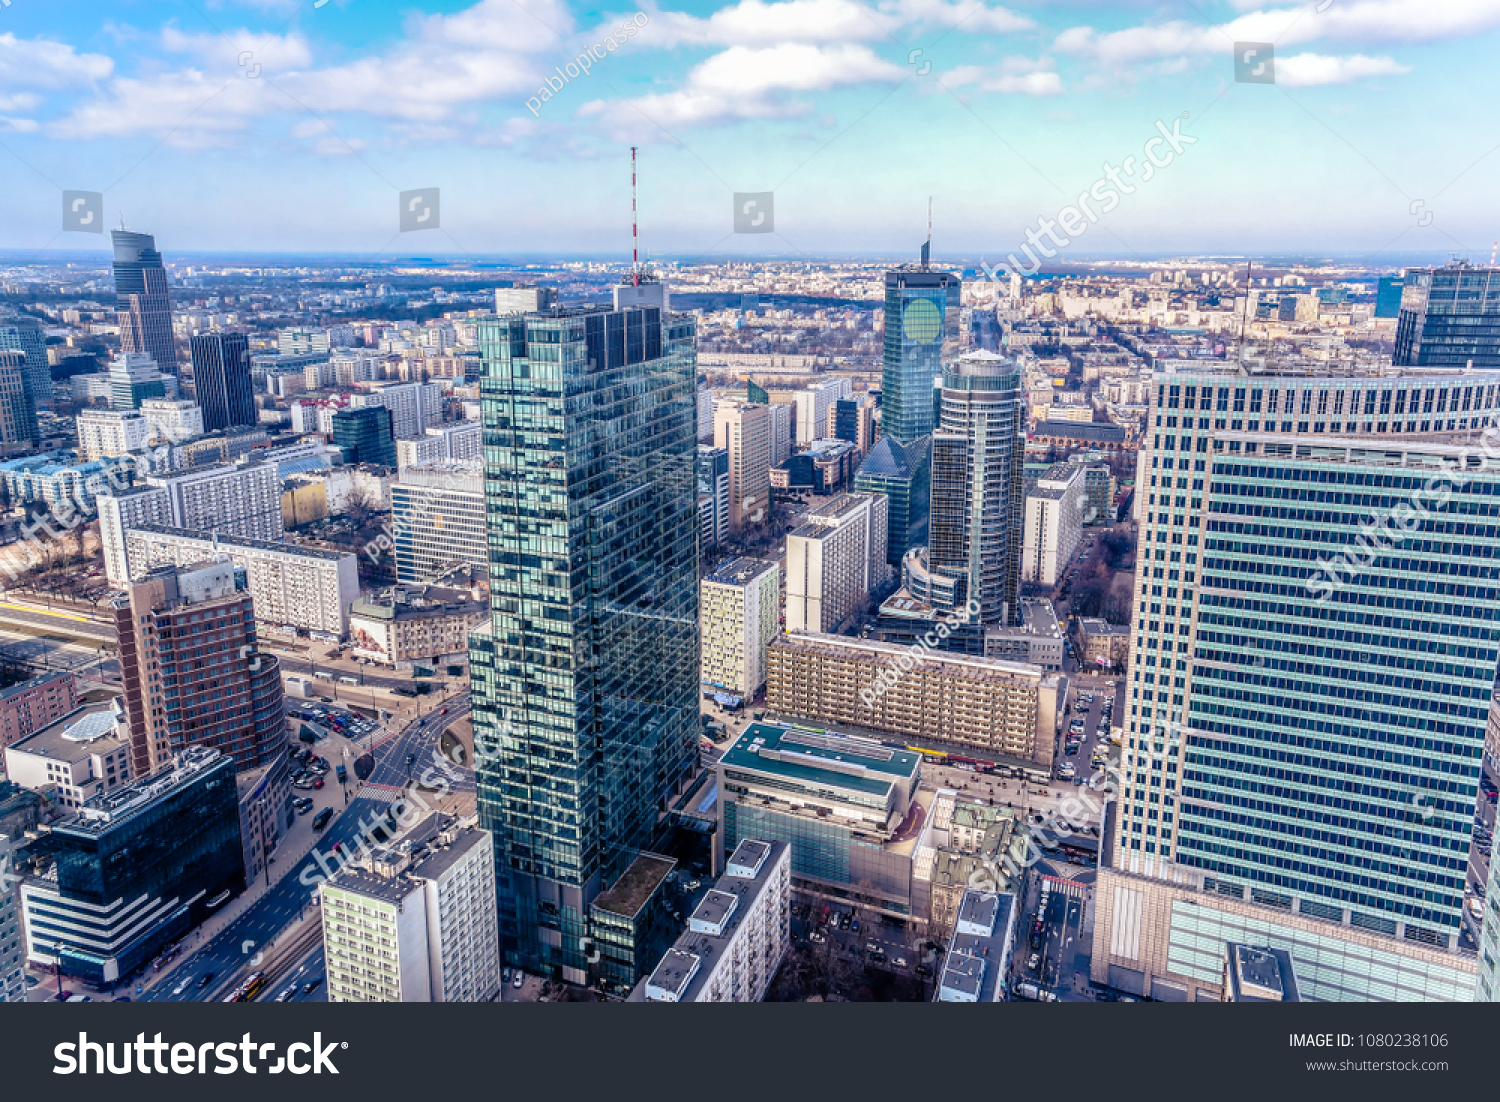 Panoramic view at the modern architecture buildings in the city center of Warsaw, Poland.  #1080238106